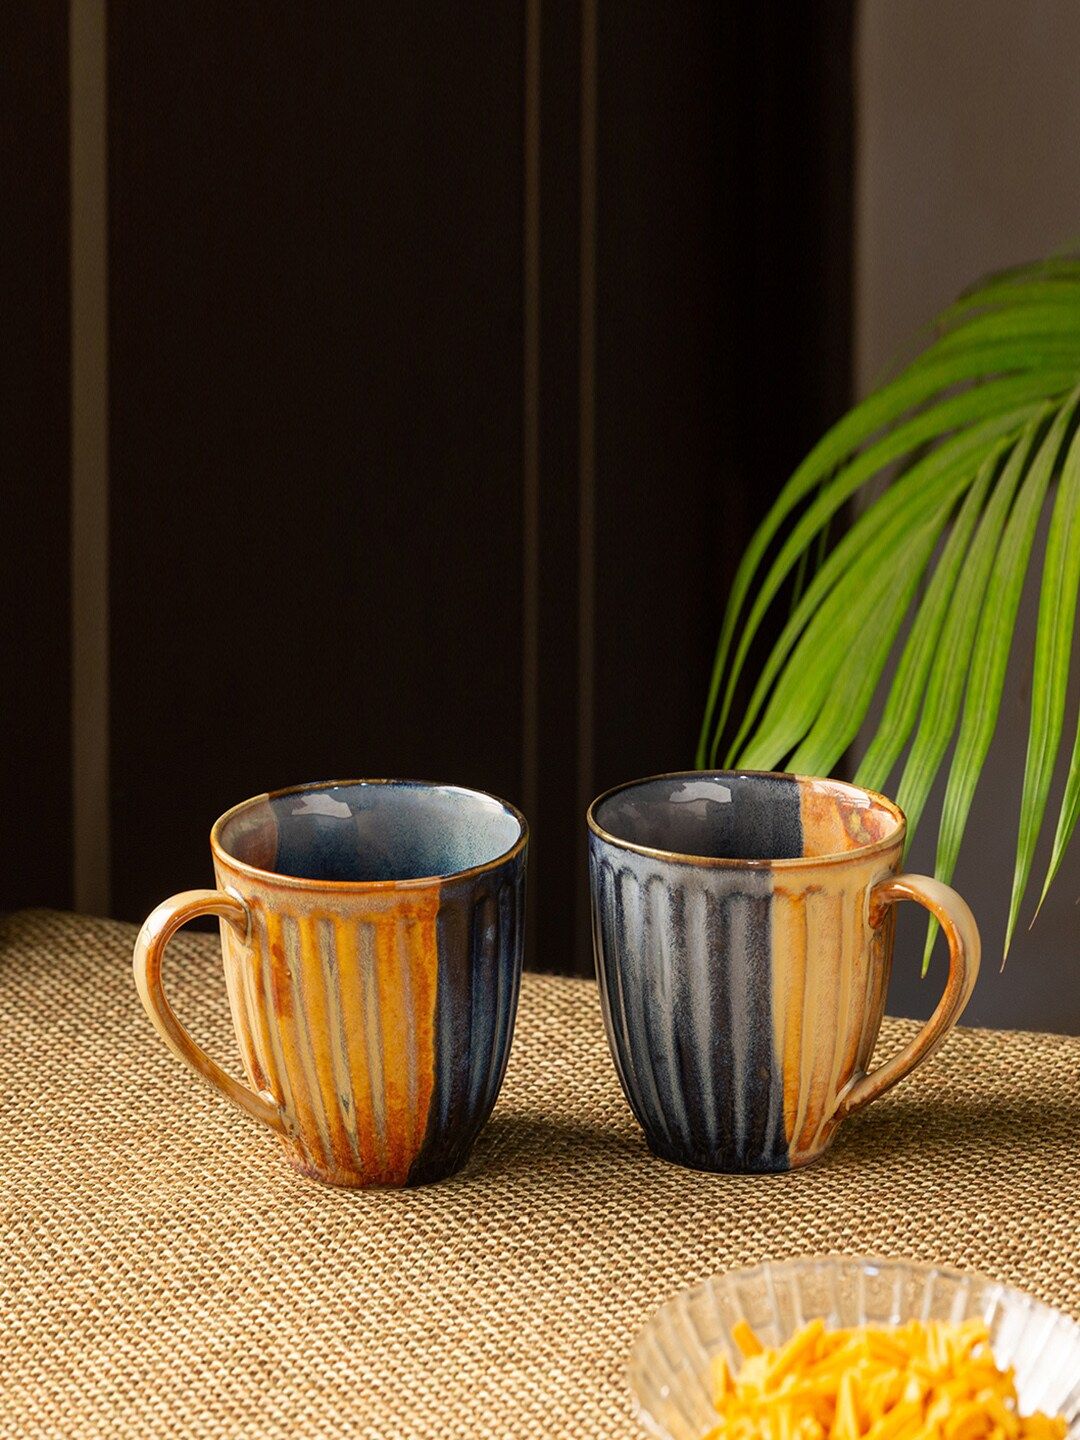 ExclusiveLane Set of 2 Blue & Brown Textured Handcrafted Ceramic Coffee Mugs Price in India